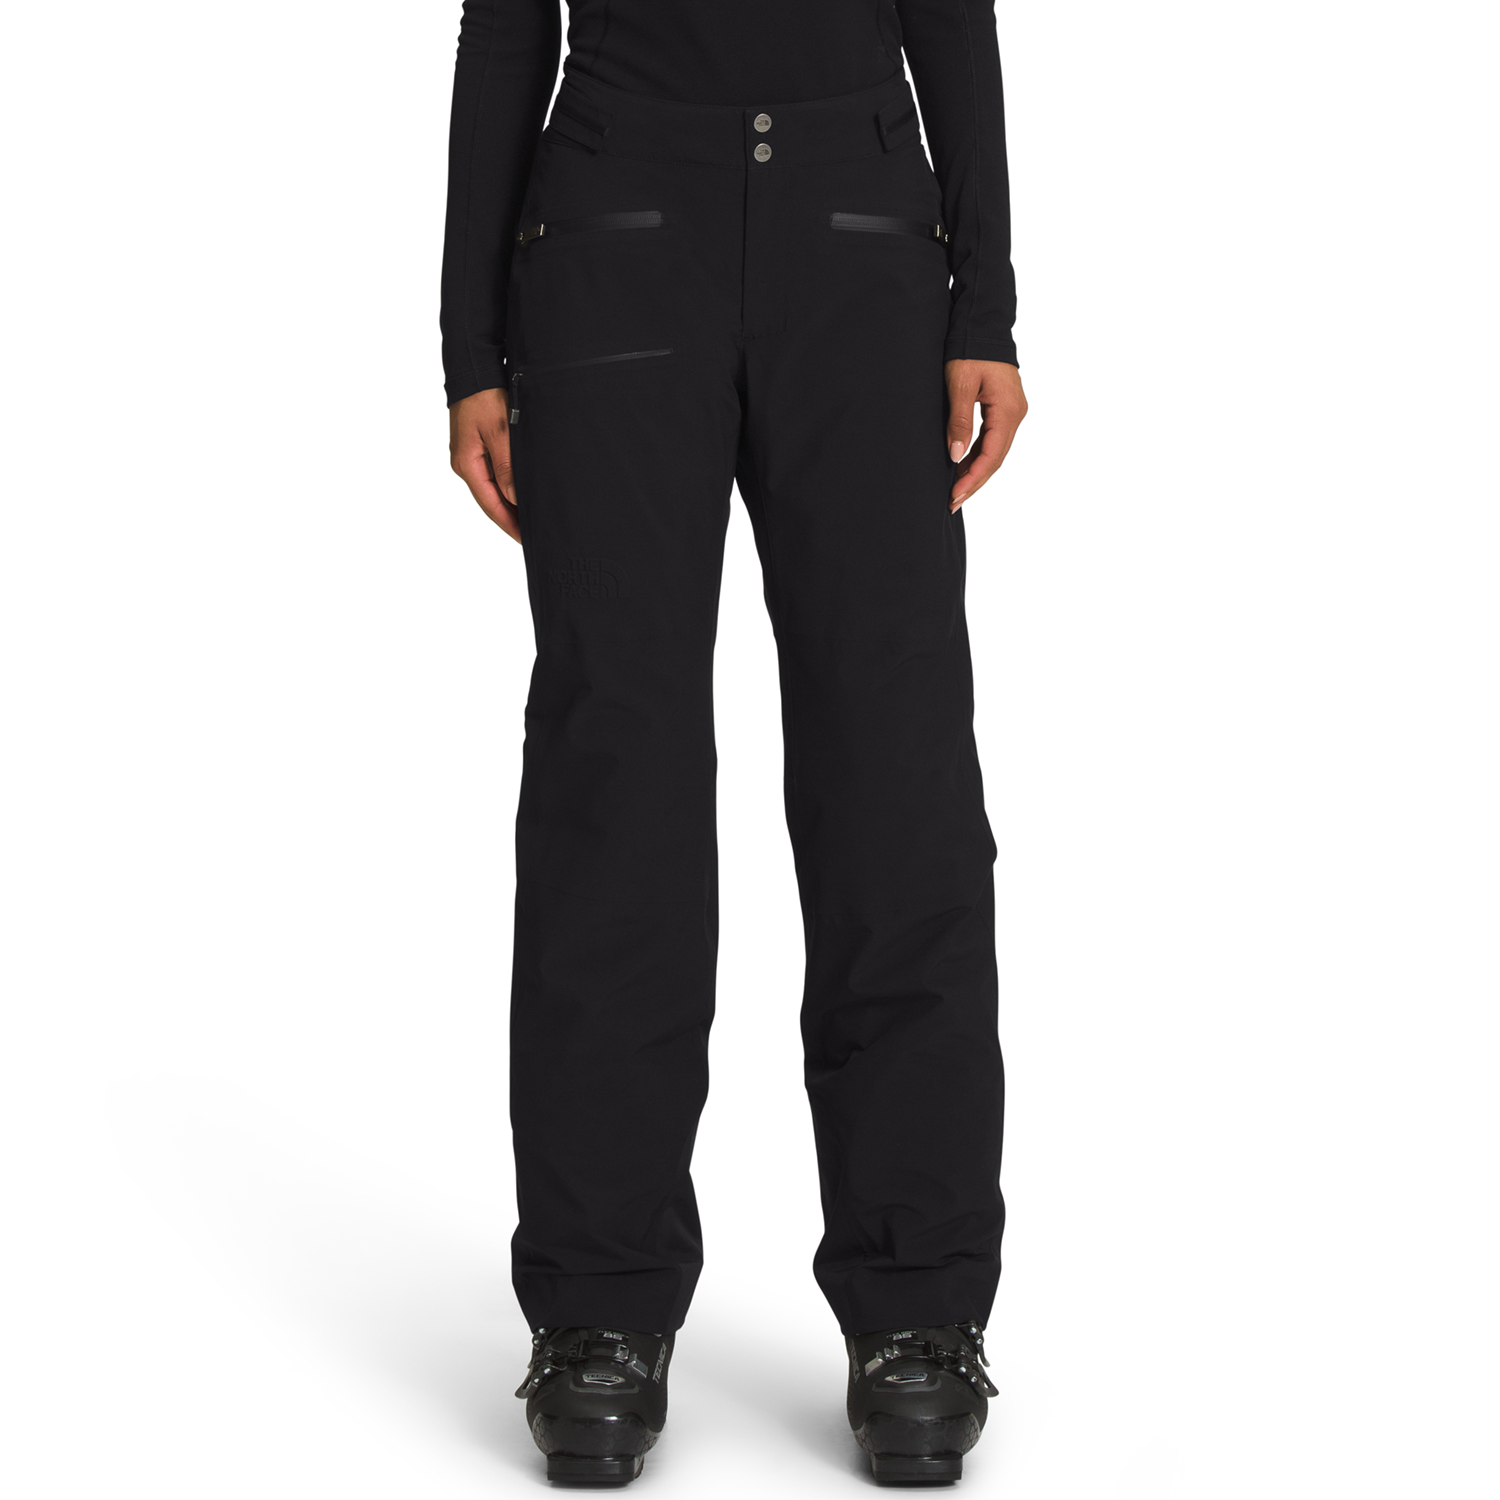 Buy Aggression Rio Waterproof  Breathable Shell Pants Online